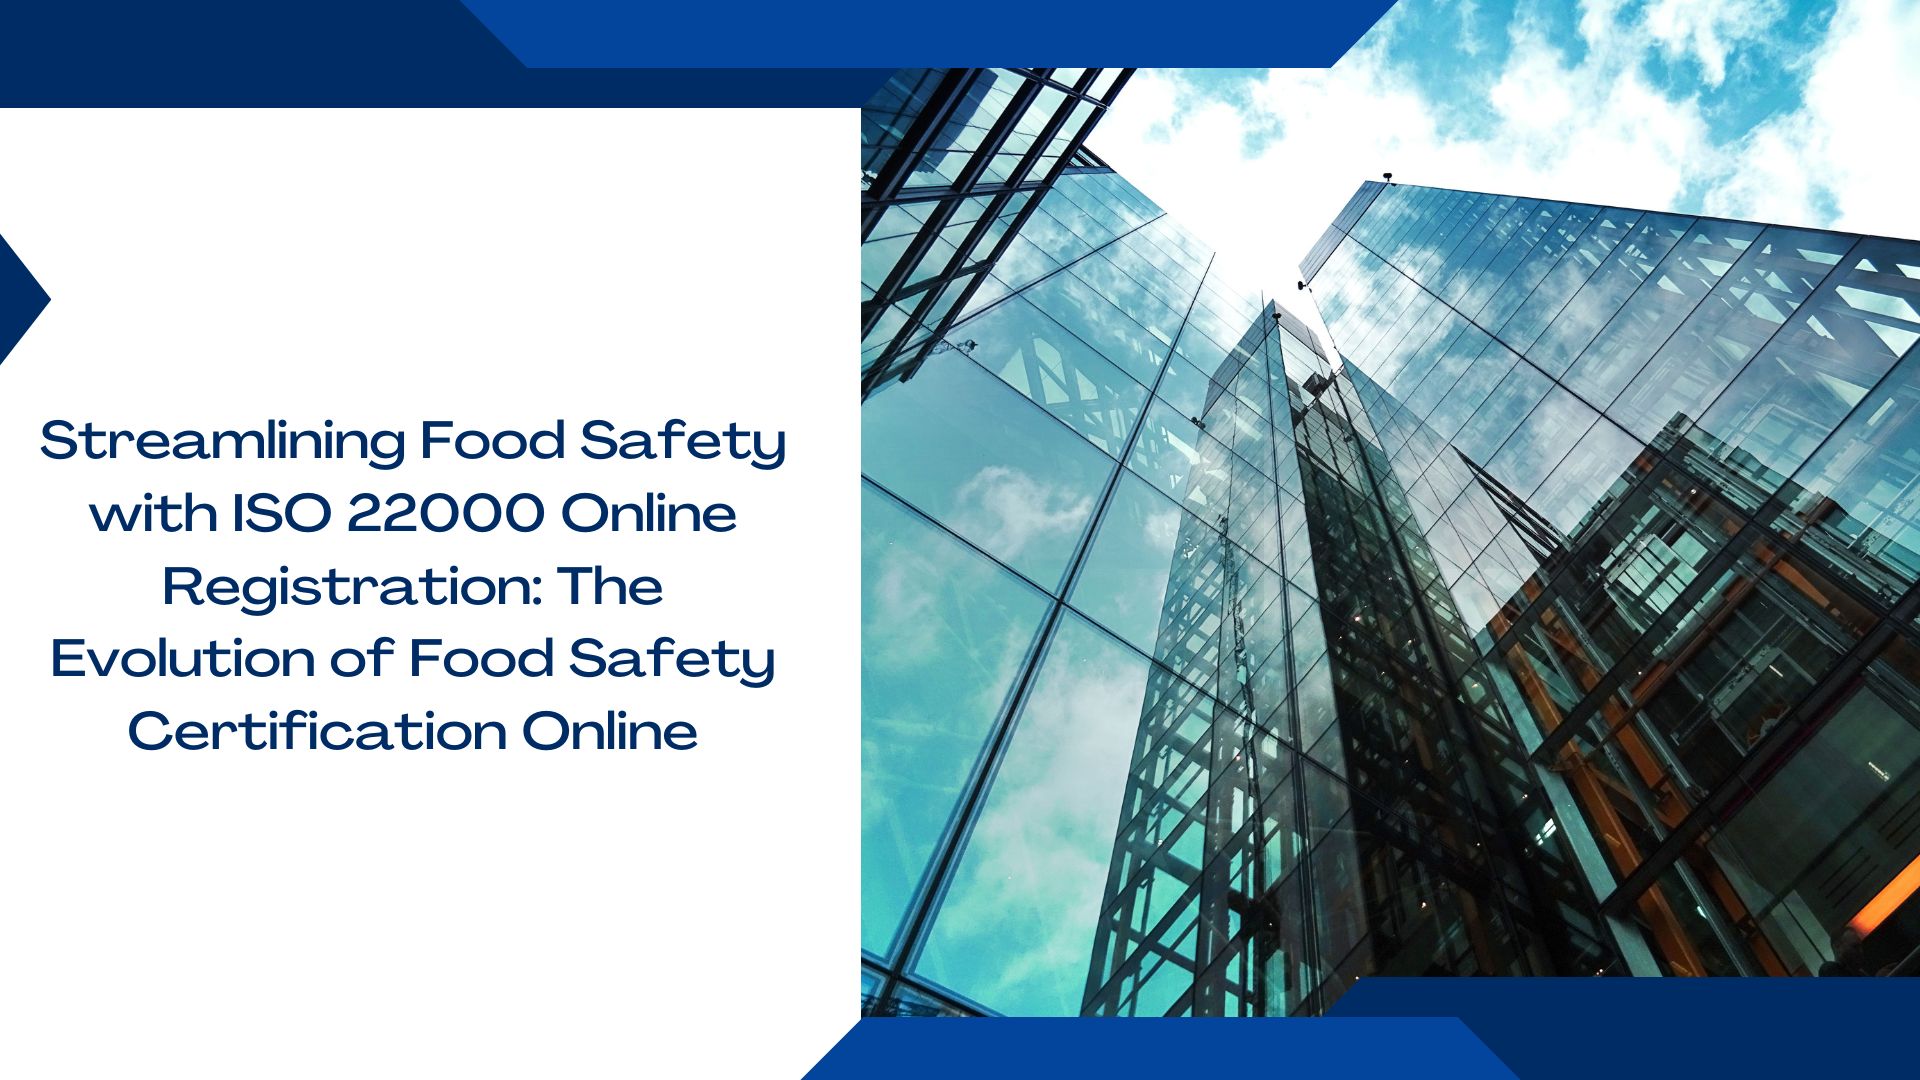 Streamlining Food Safety with ISO 22000 Online Registration: The Evolution of Food Safety Certification Online